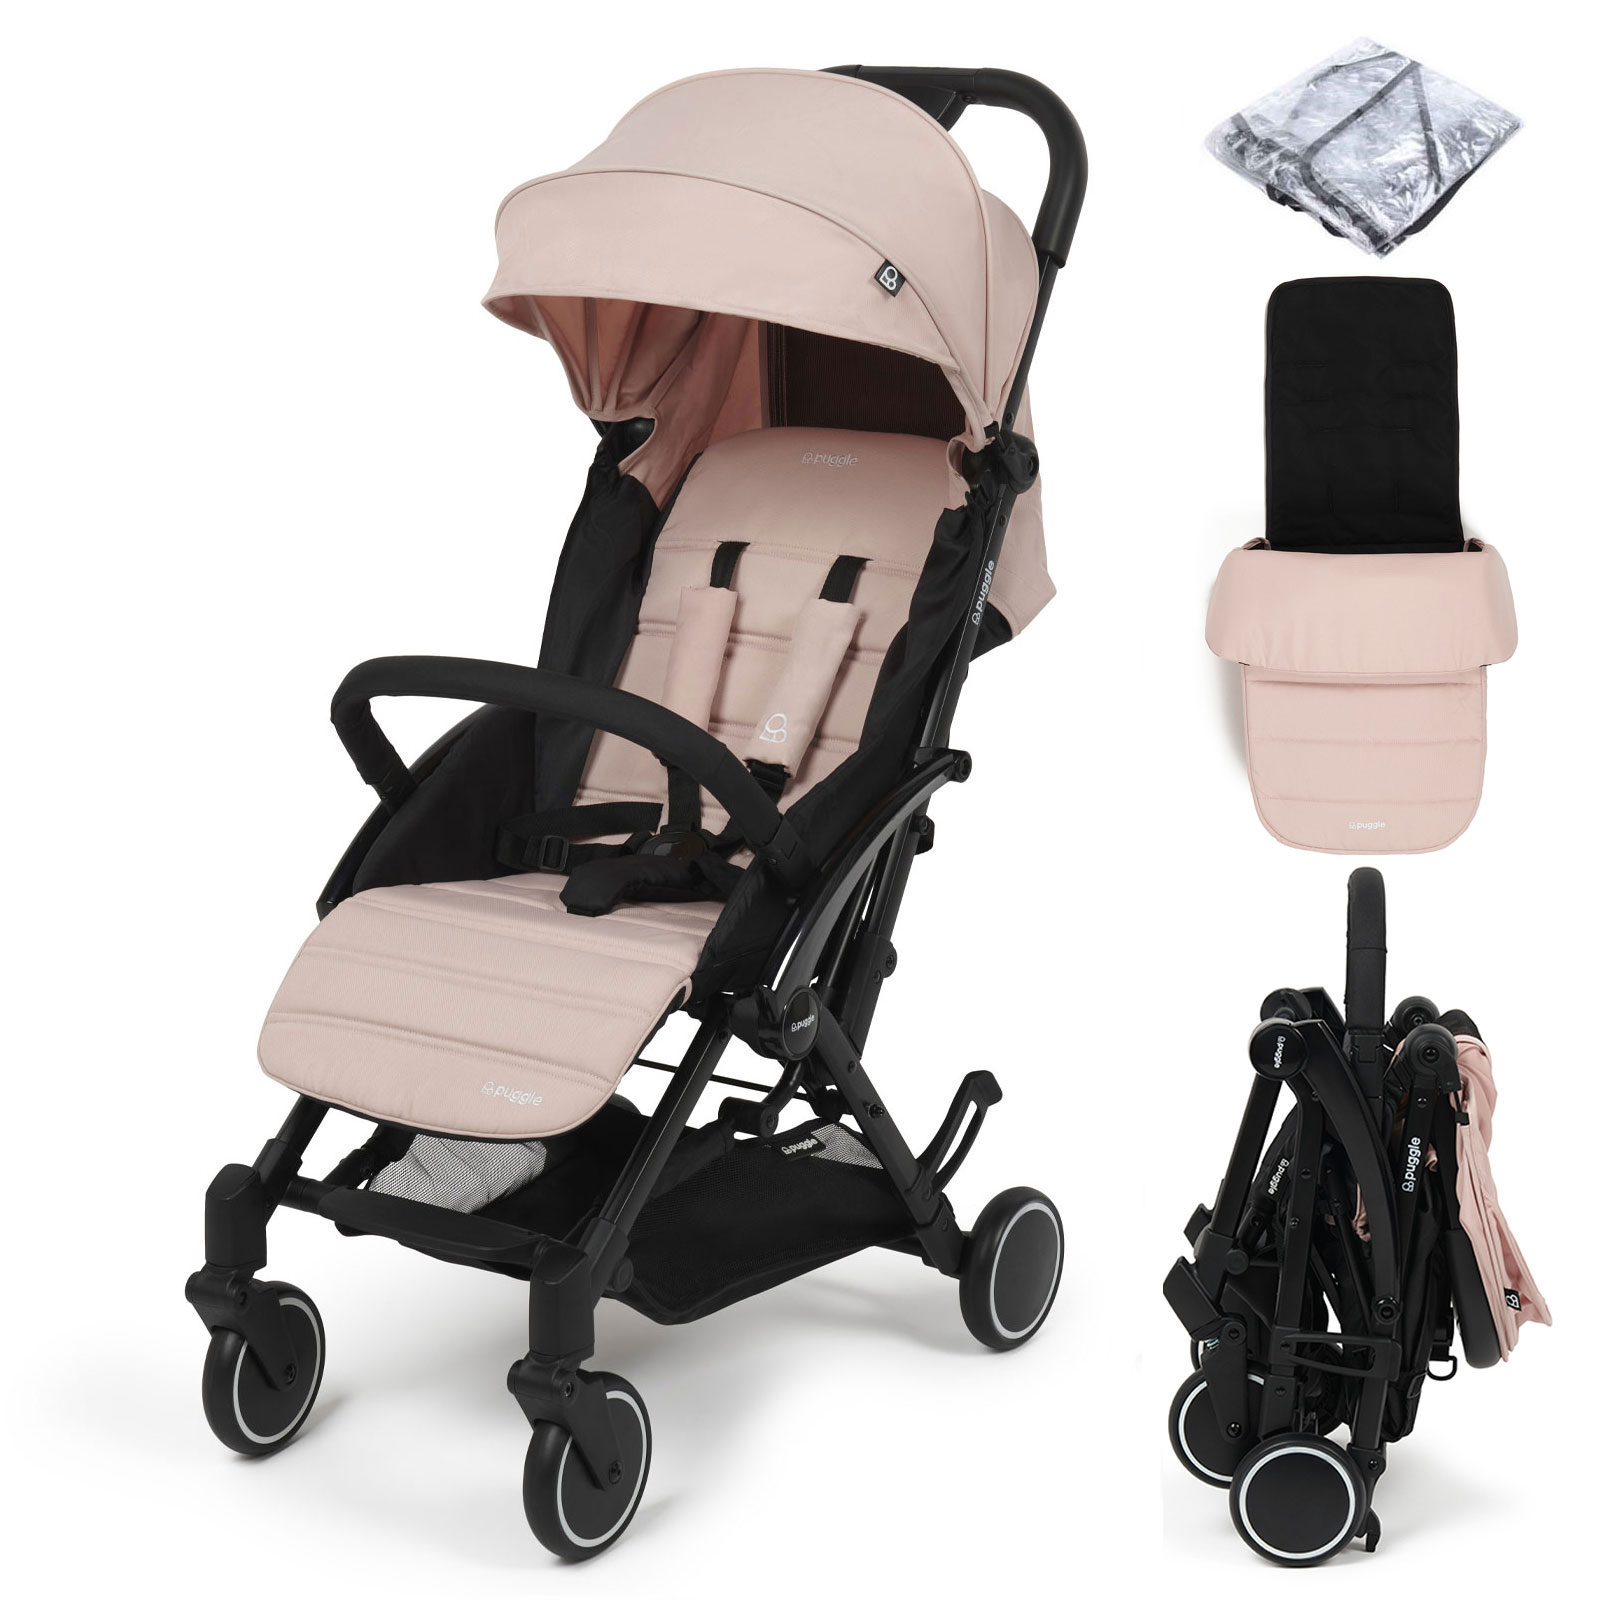 Puggle Seattle Fold & Go Compact Pushchair & Raincover With Monaco Footmuff - Blush Pink